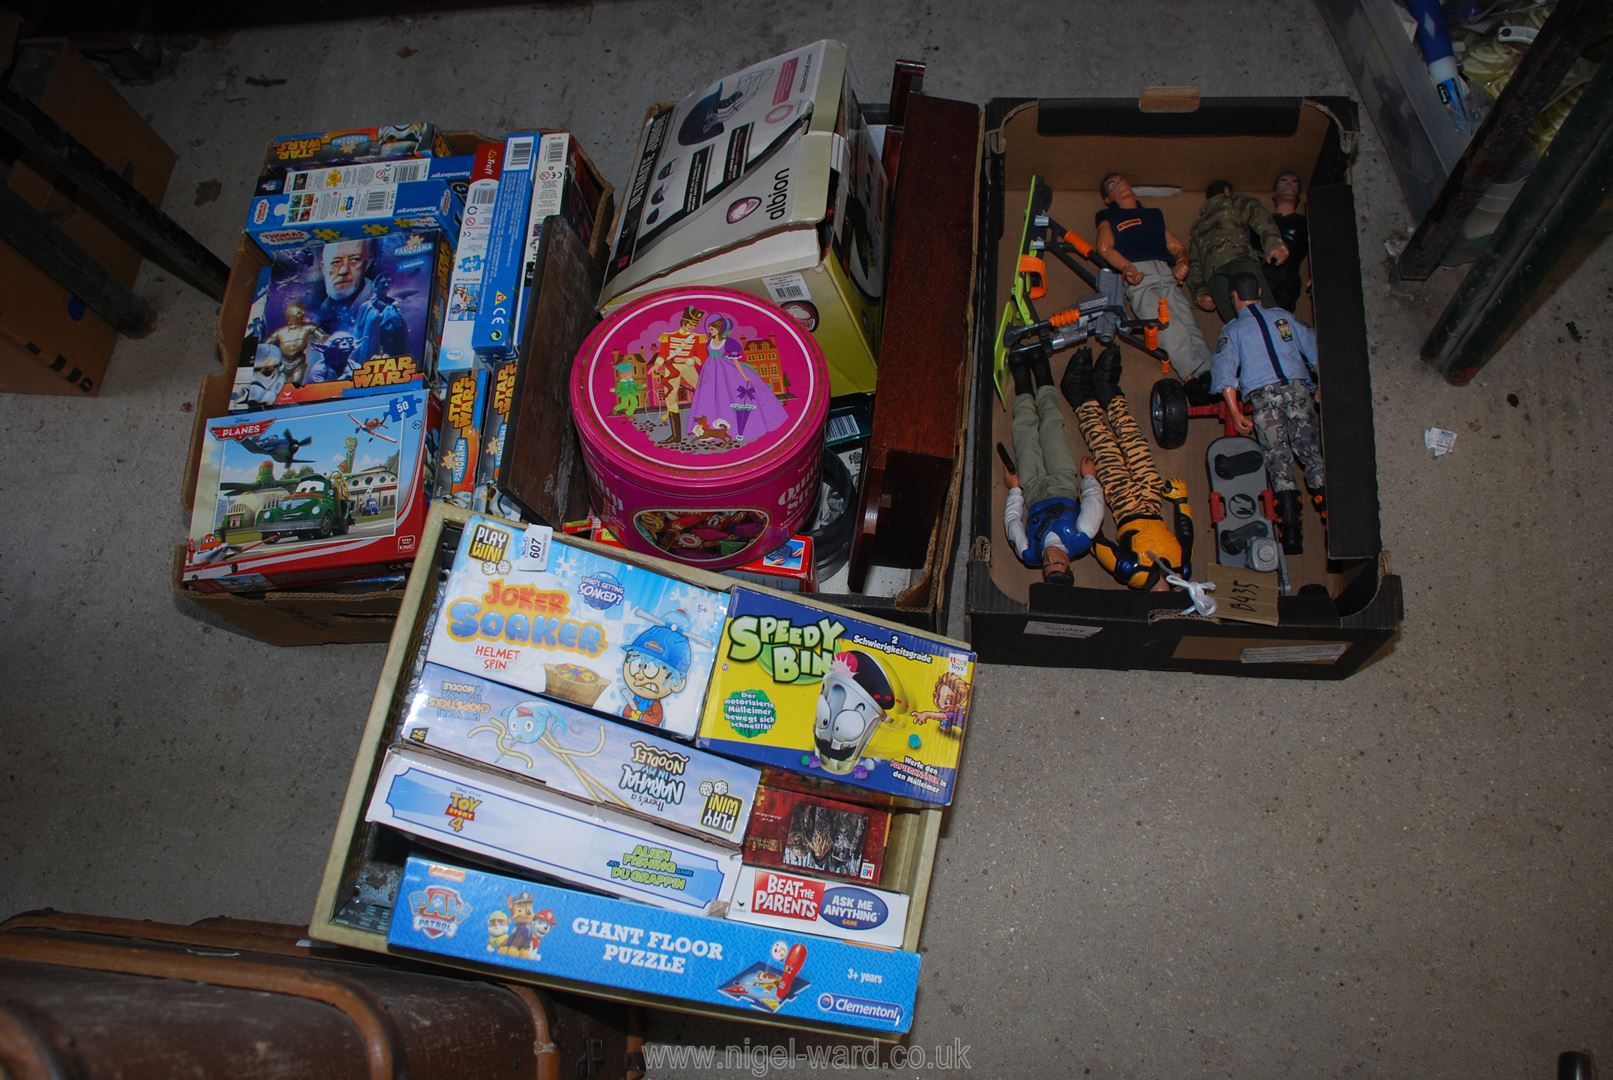 A box of games, giant puzzles and action man figures.